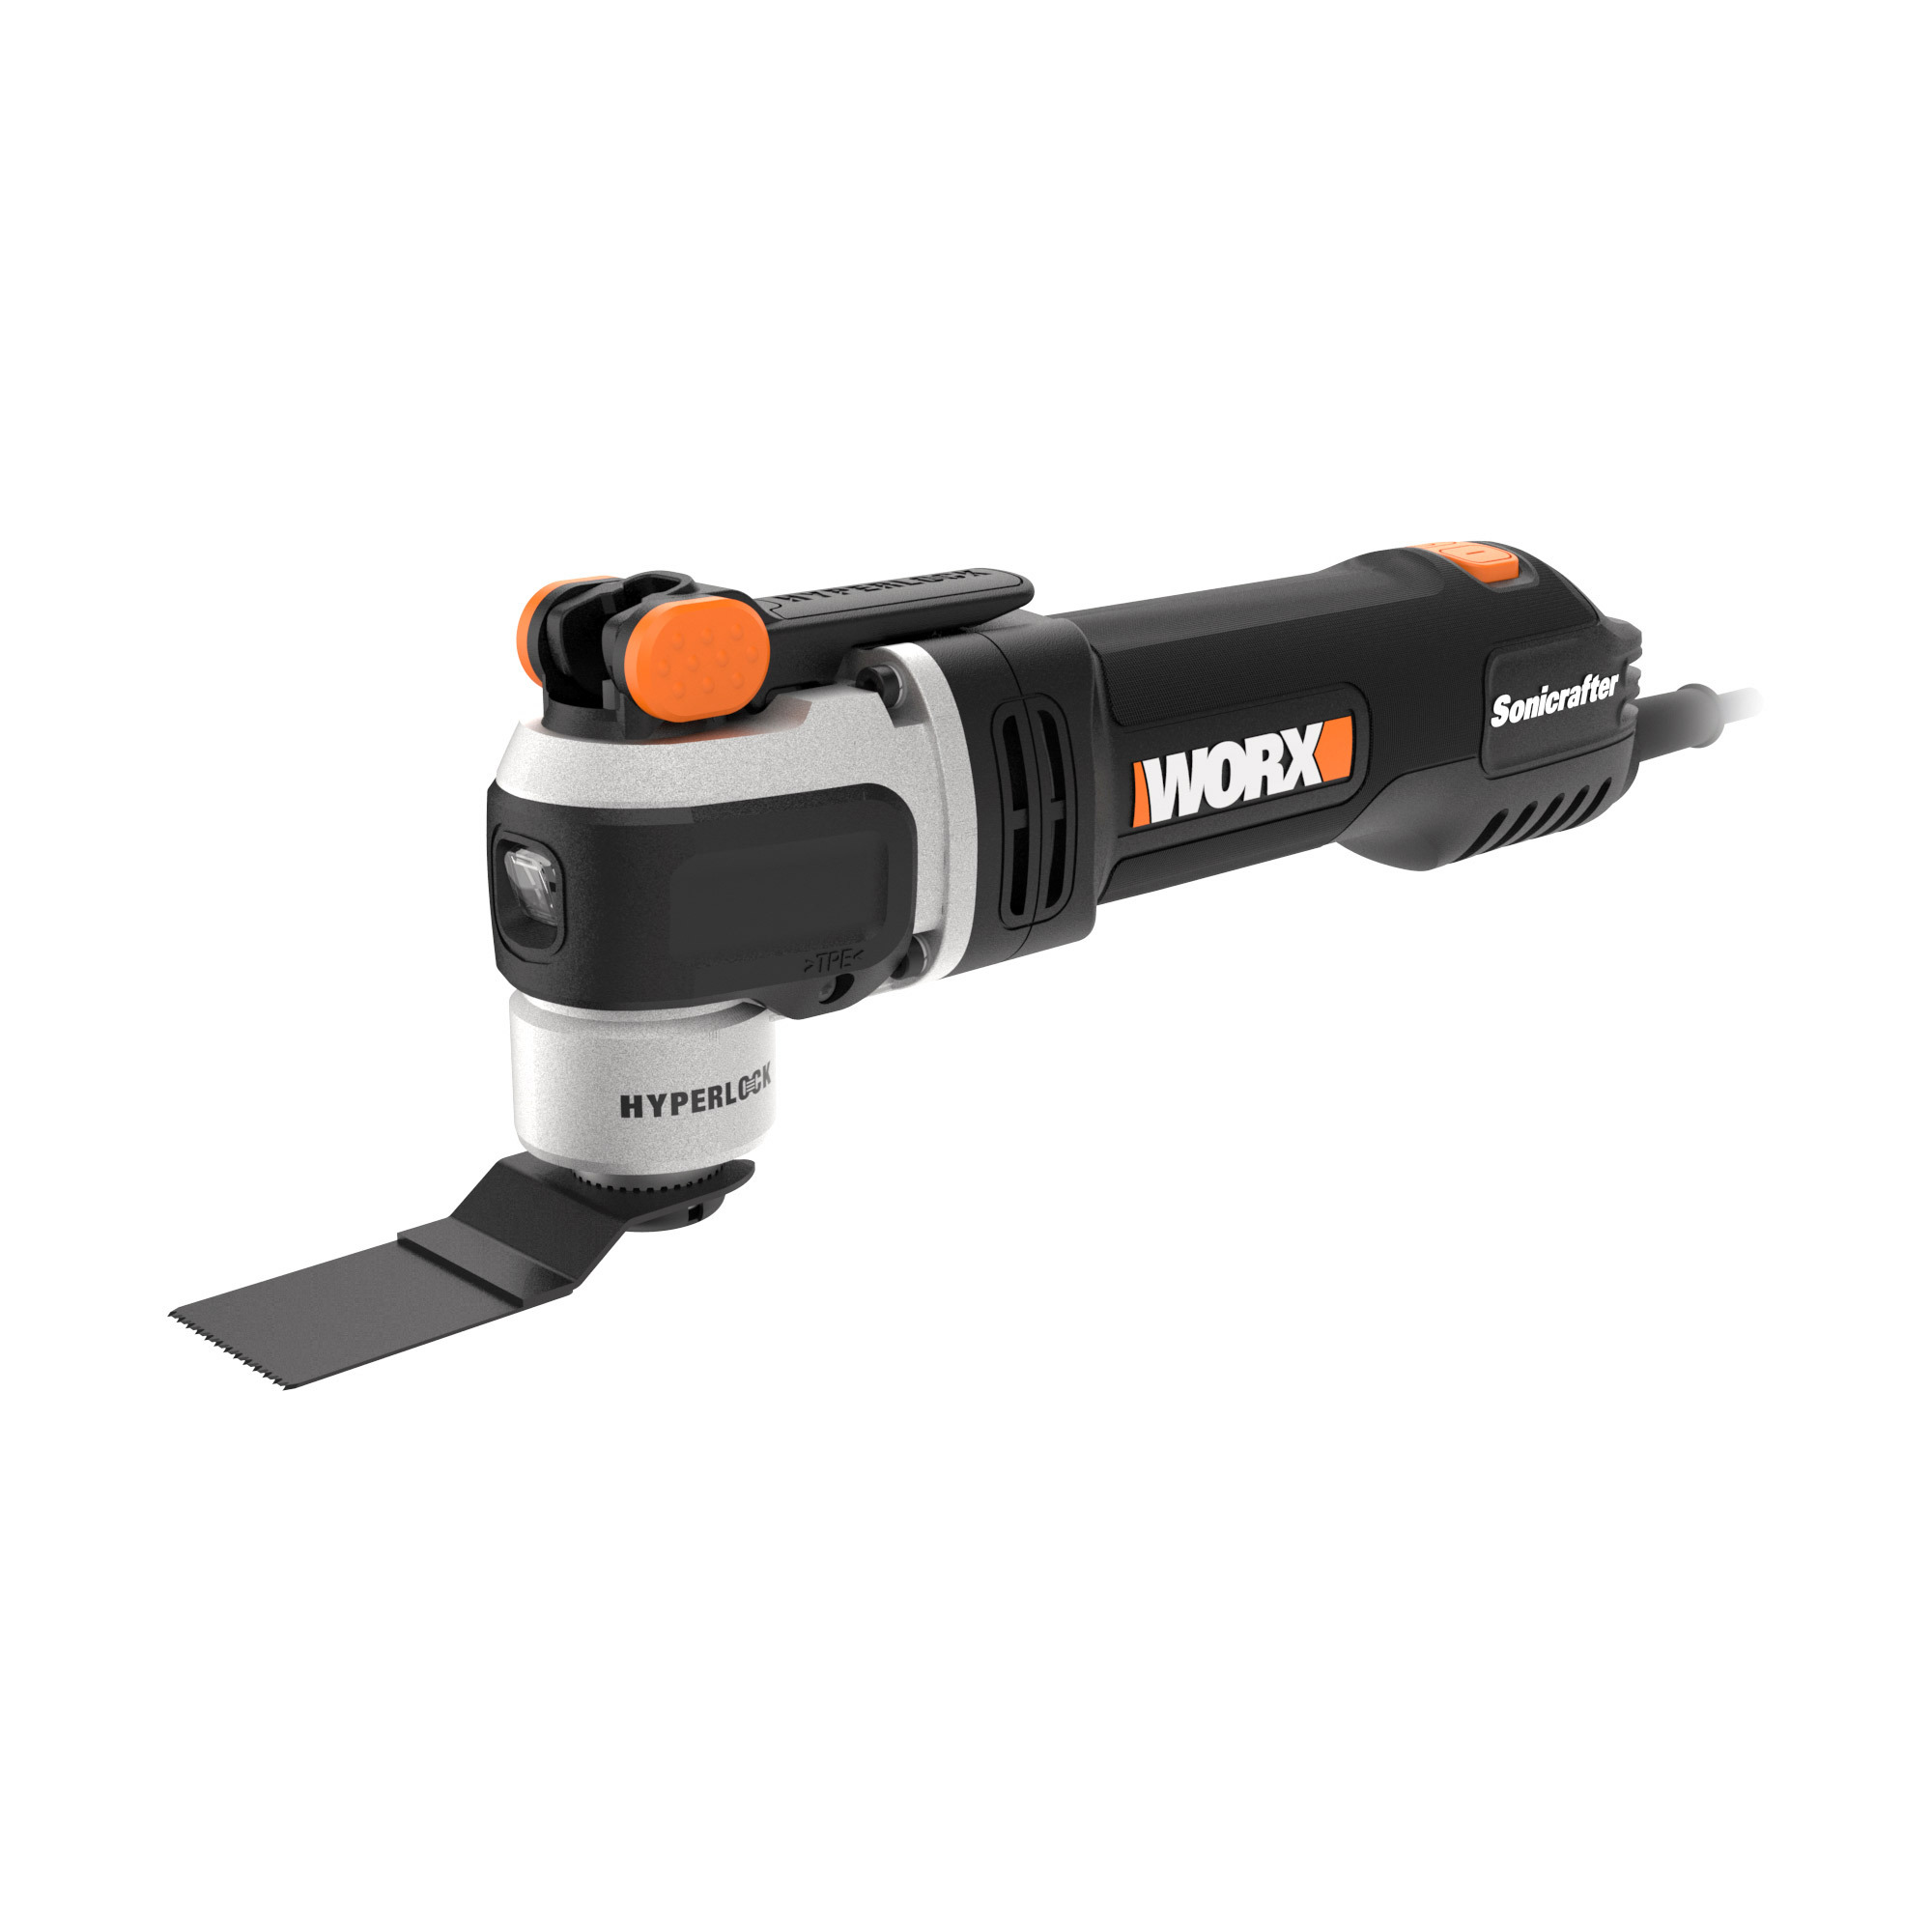 Worx WX687L 3.5 amp Corded Sonicrafter Oscillating Multi-Tool